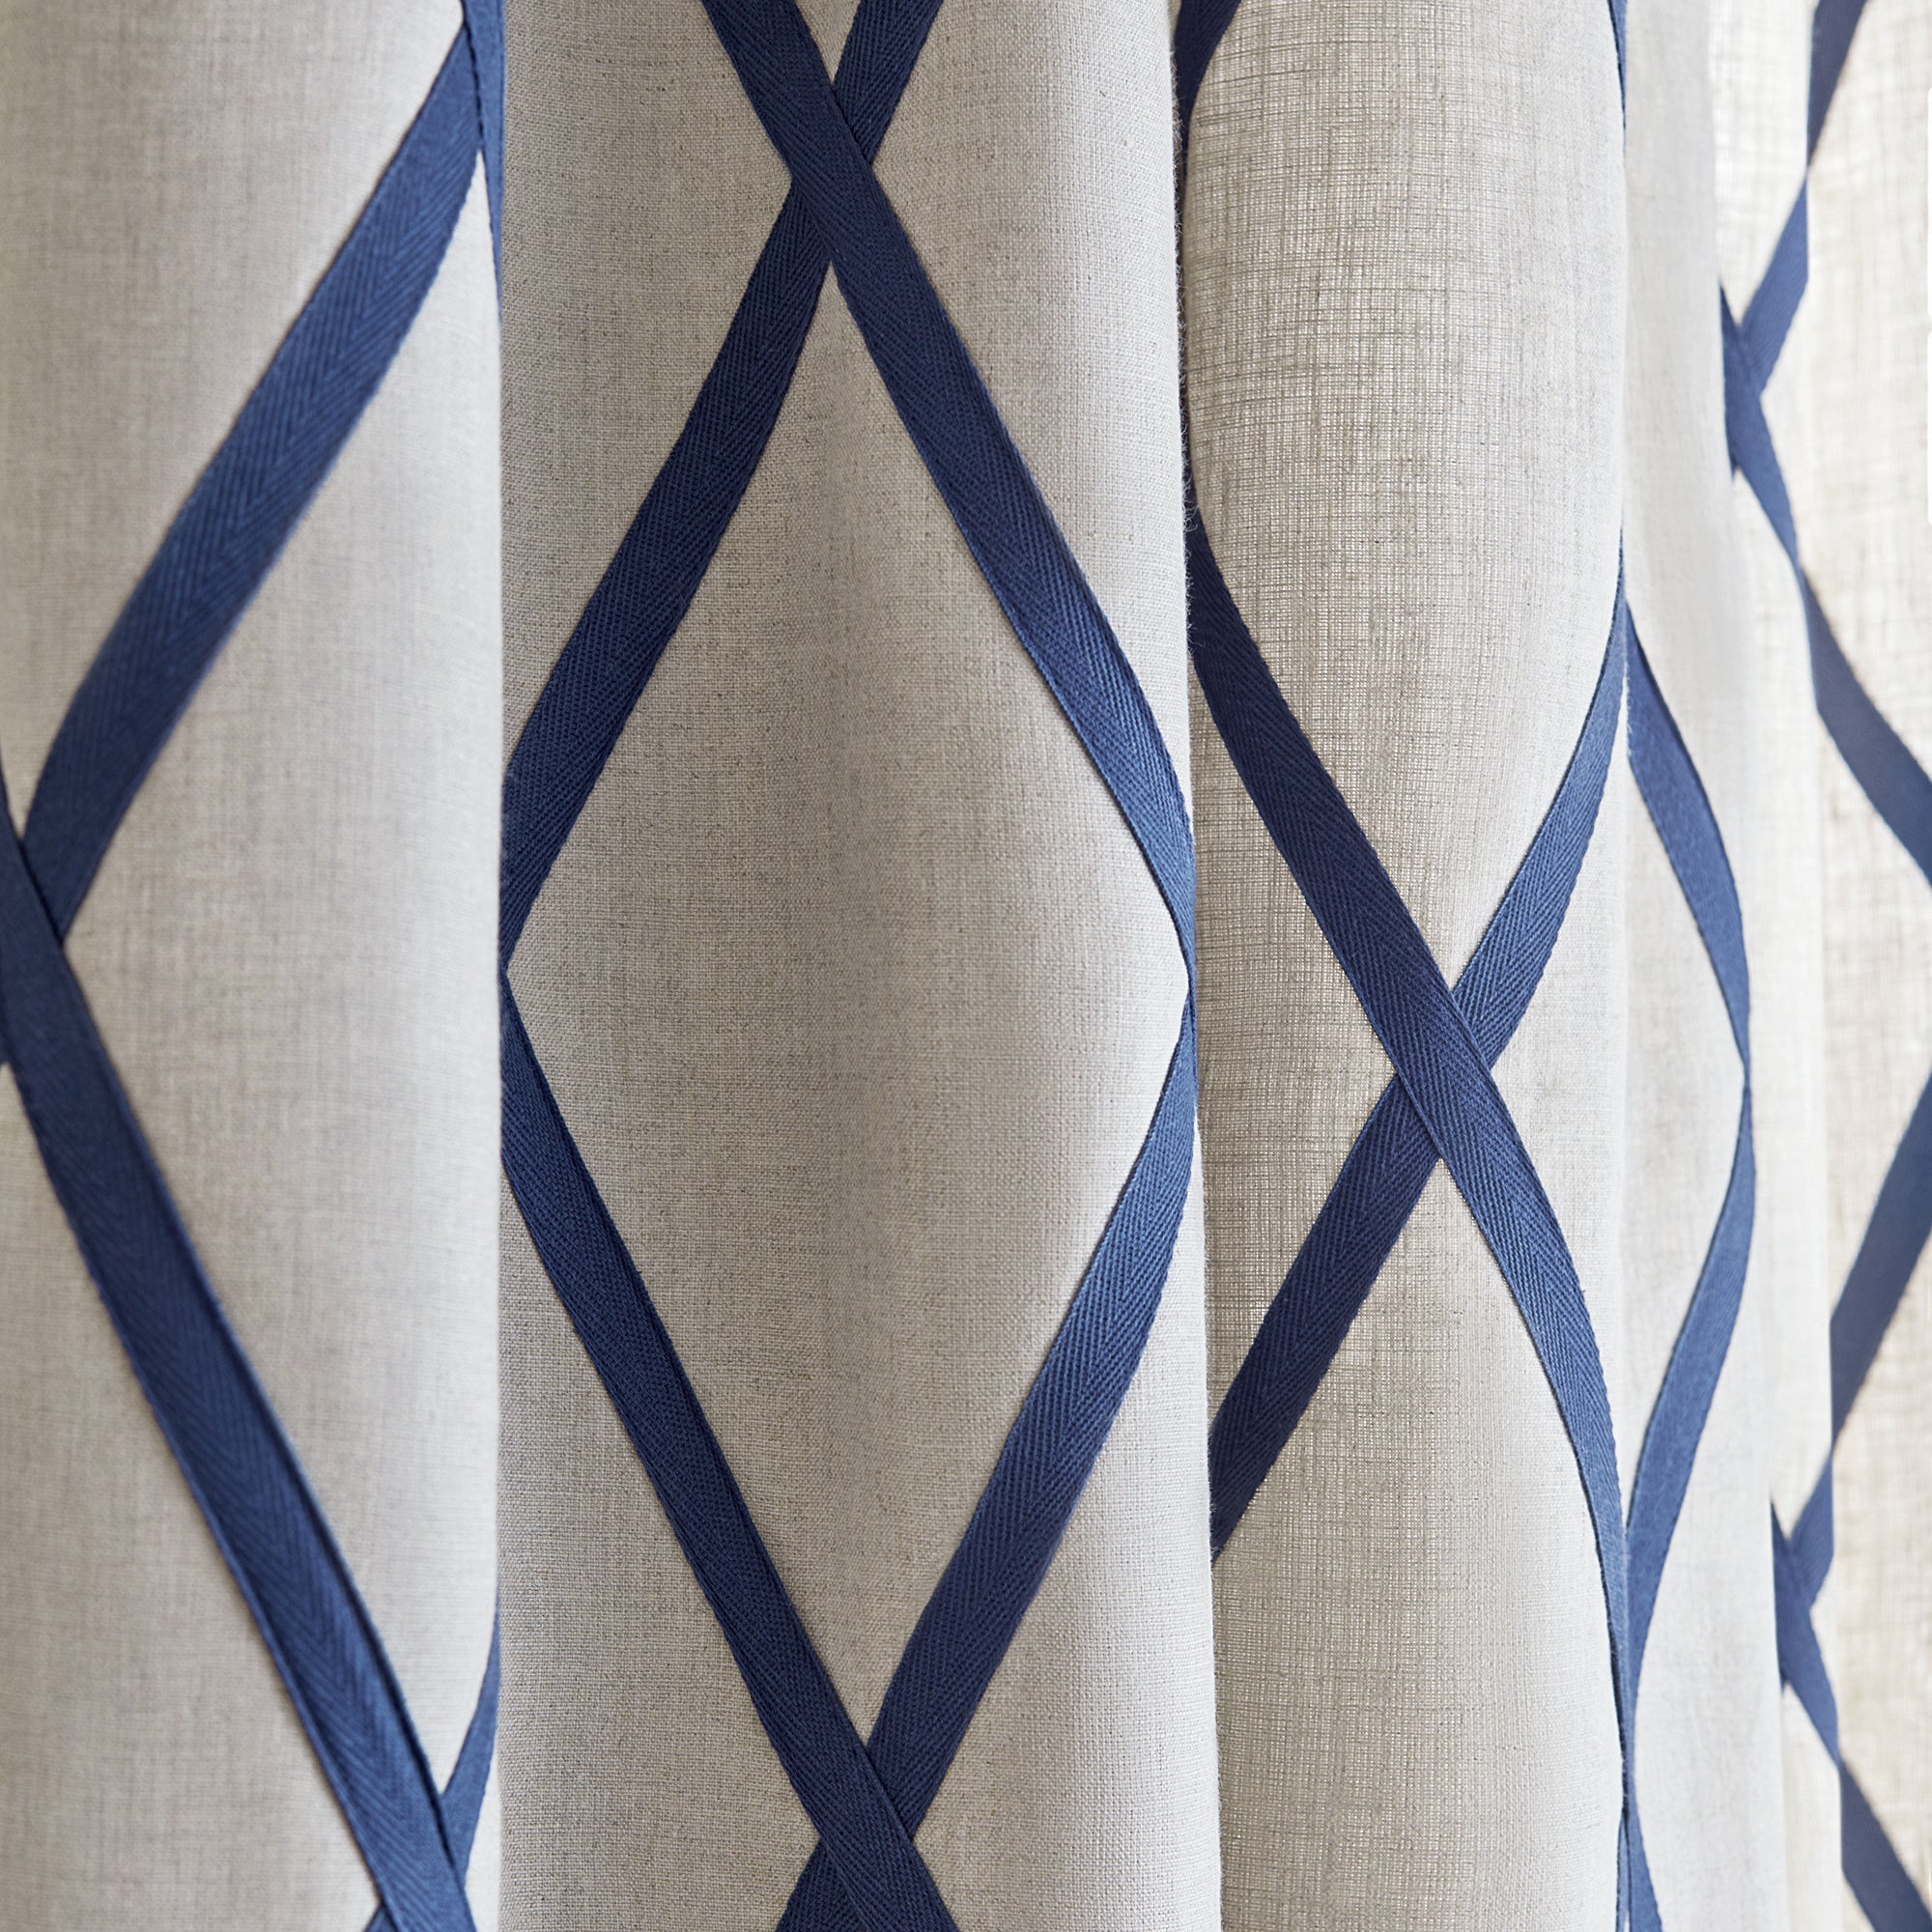 Detail view of draperies made with Tarascon Trellis Applique fabric in navy on natural color - pattern number AW78713 - by Anna French